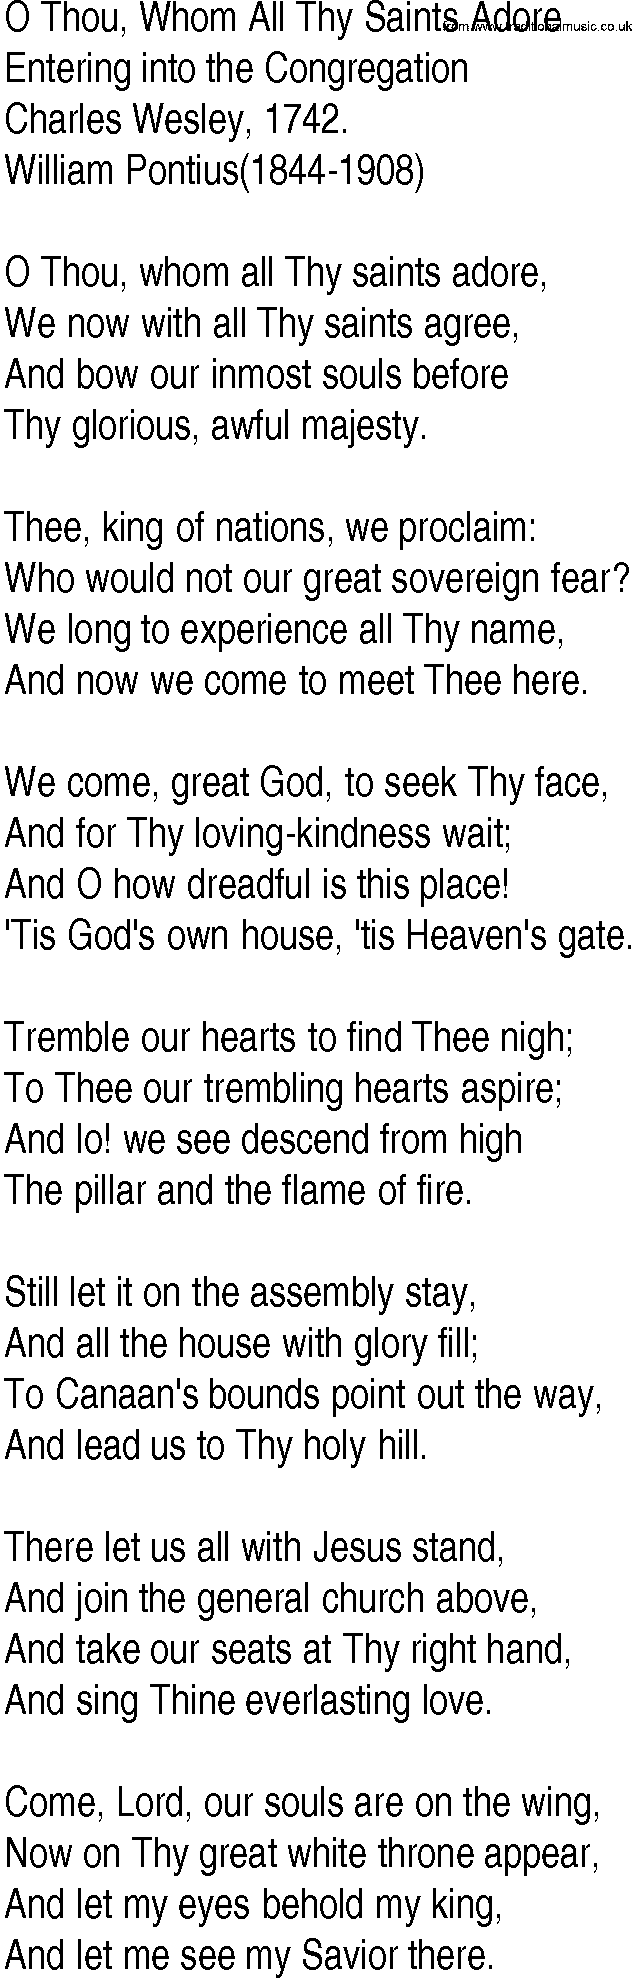 Hymn and Gospel Song: O Thou, Whom All Thy Saints Adore by Charles Wesley lyrics